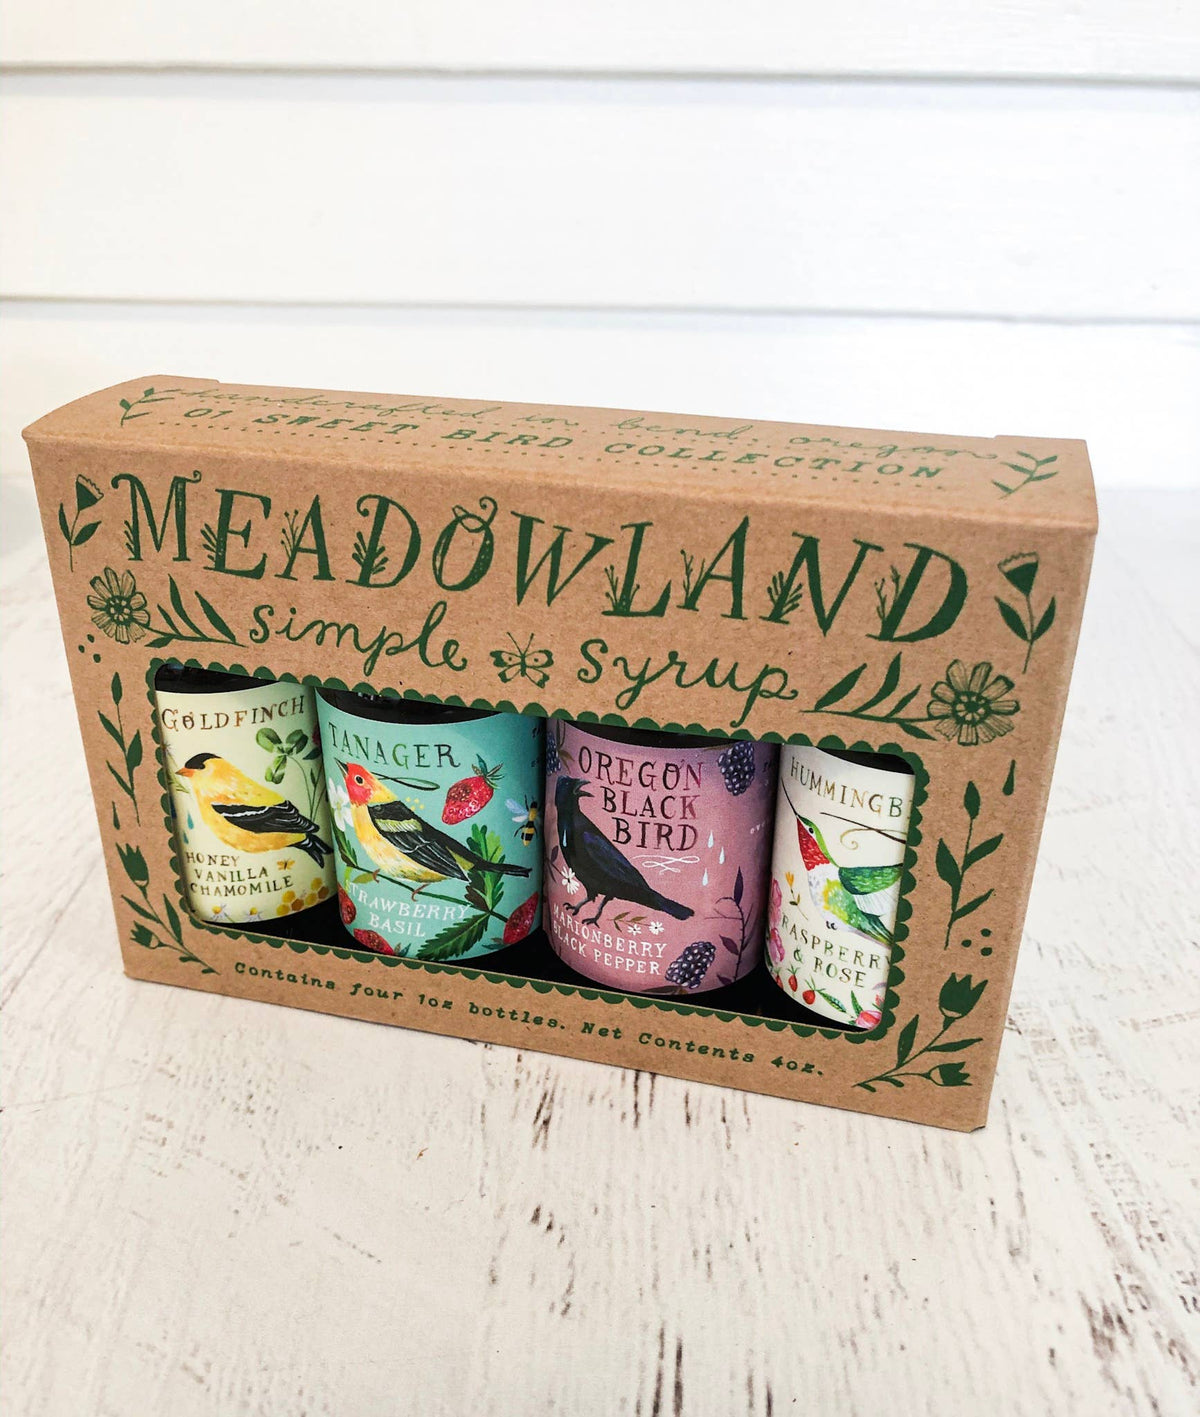 Meadowland Syrup Simple Syrup Collection: Sweet Bird gift set.